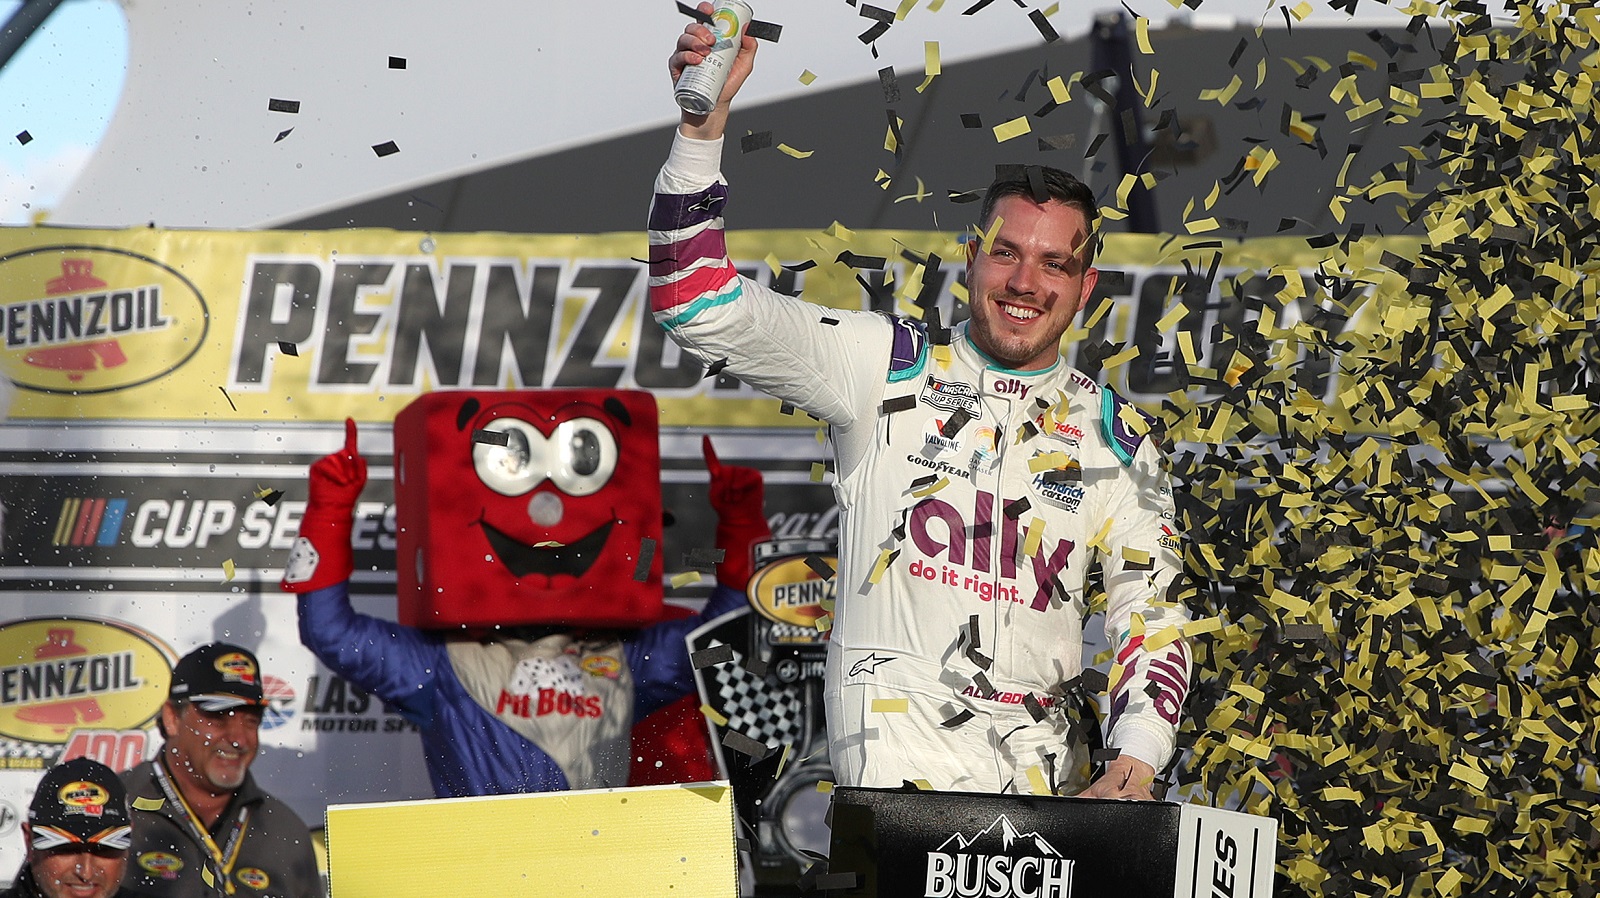 Alex Bowman, driver of the No. 48 Chevrolet, celebrates after winning the NASCAR Cup Series Pennzoil 400 at Las Vegas Motor Speedway on March 6, 2022.